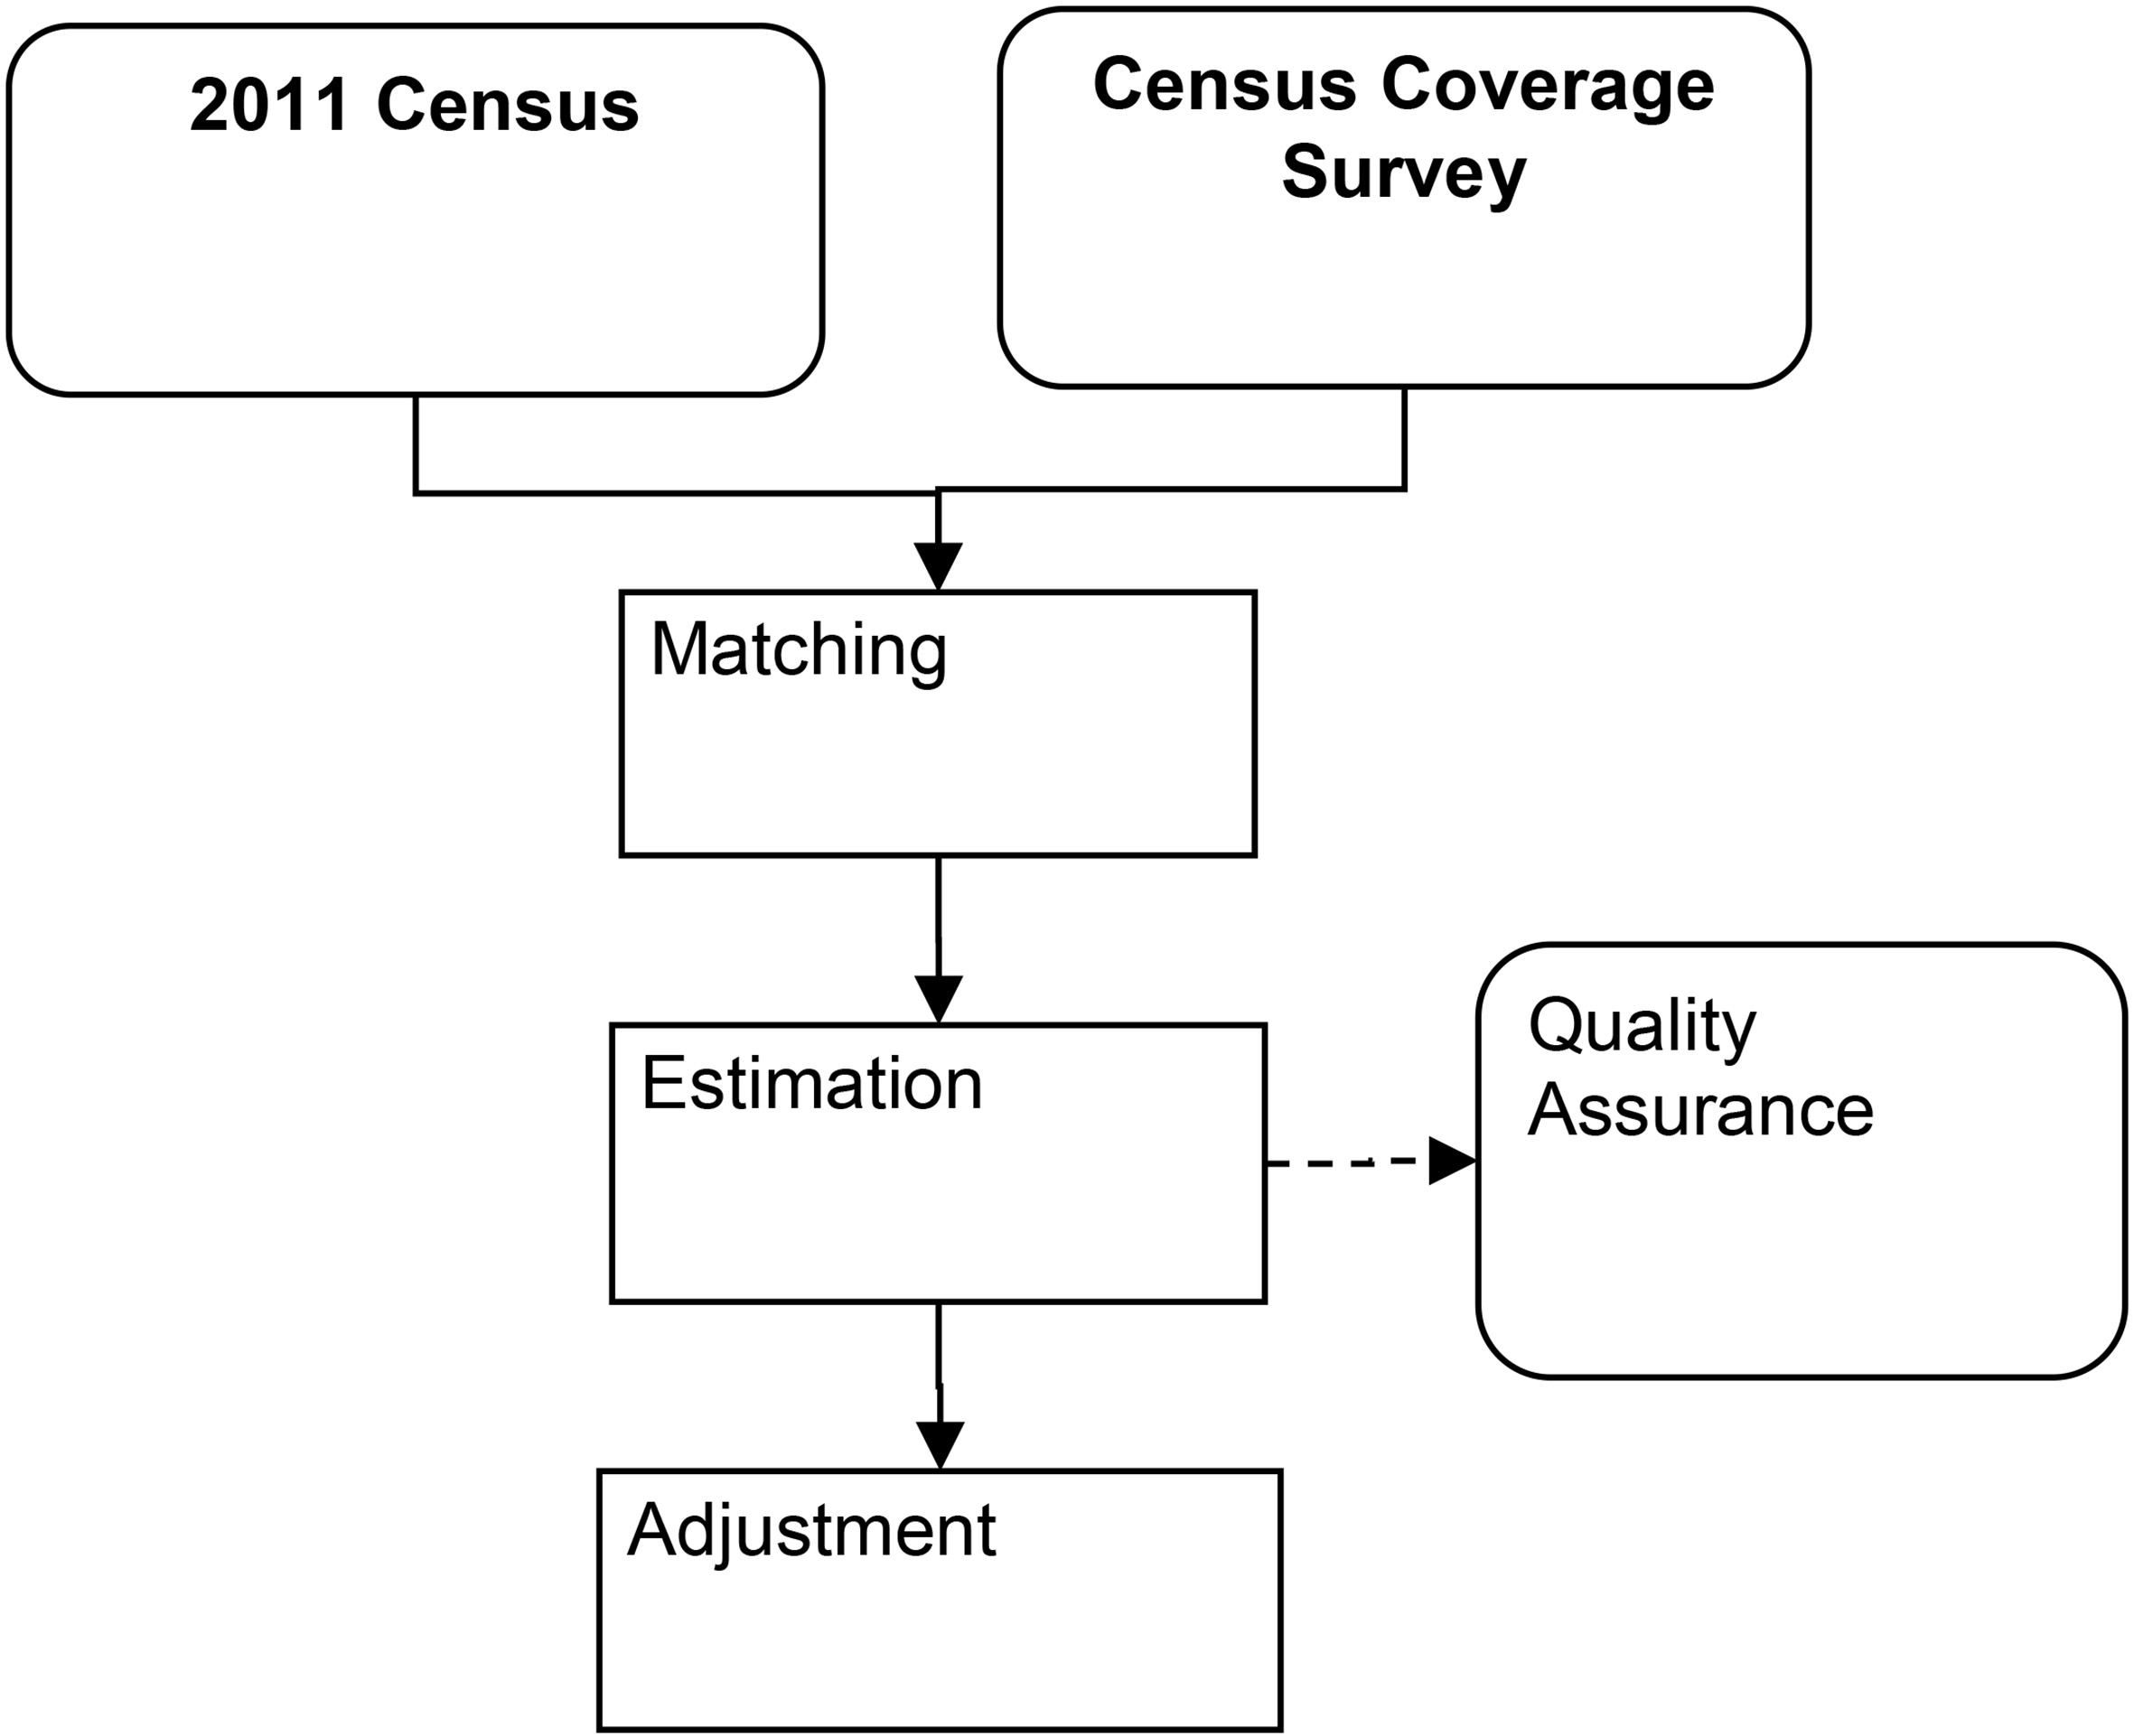 Overview of the 2011 coverage assessment and adjustment process.